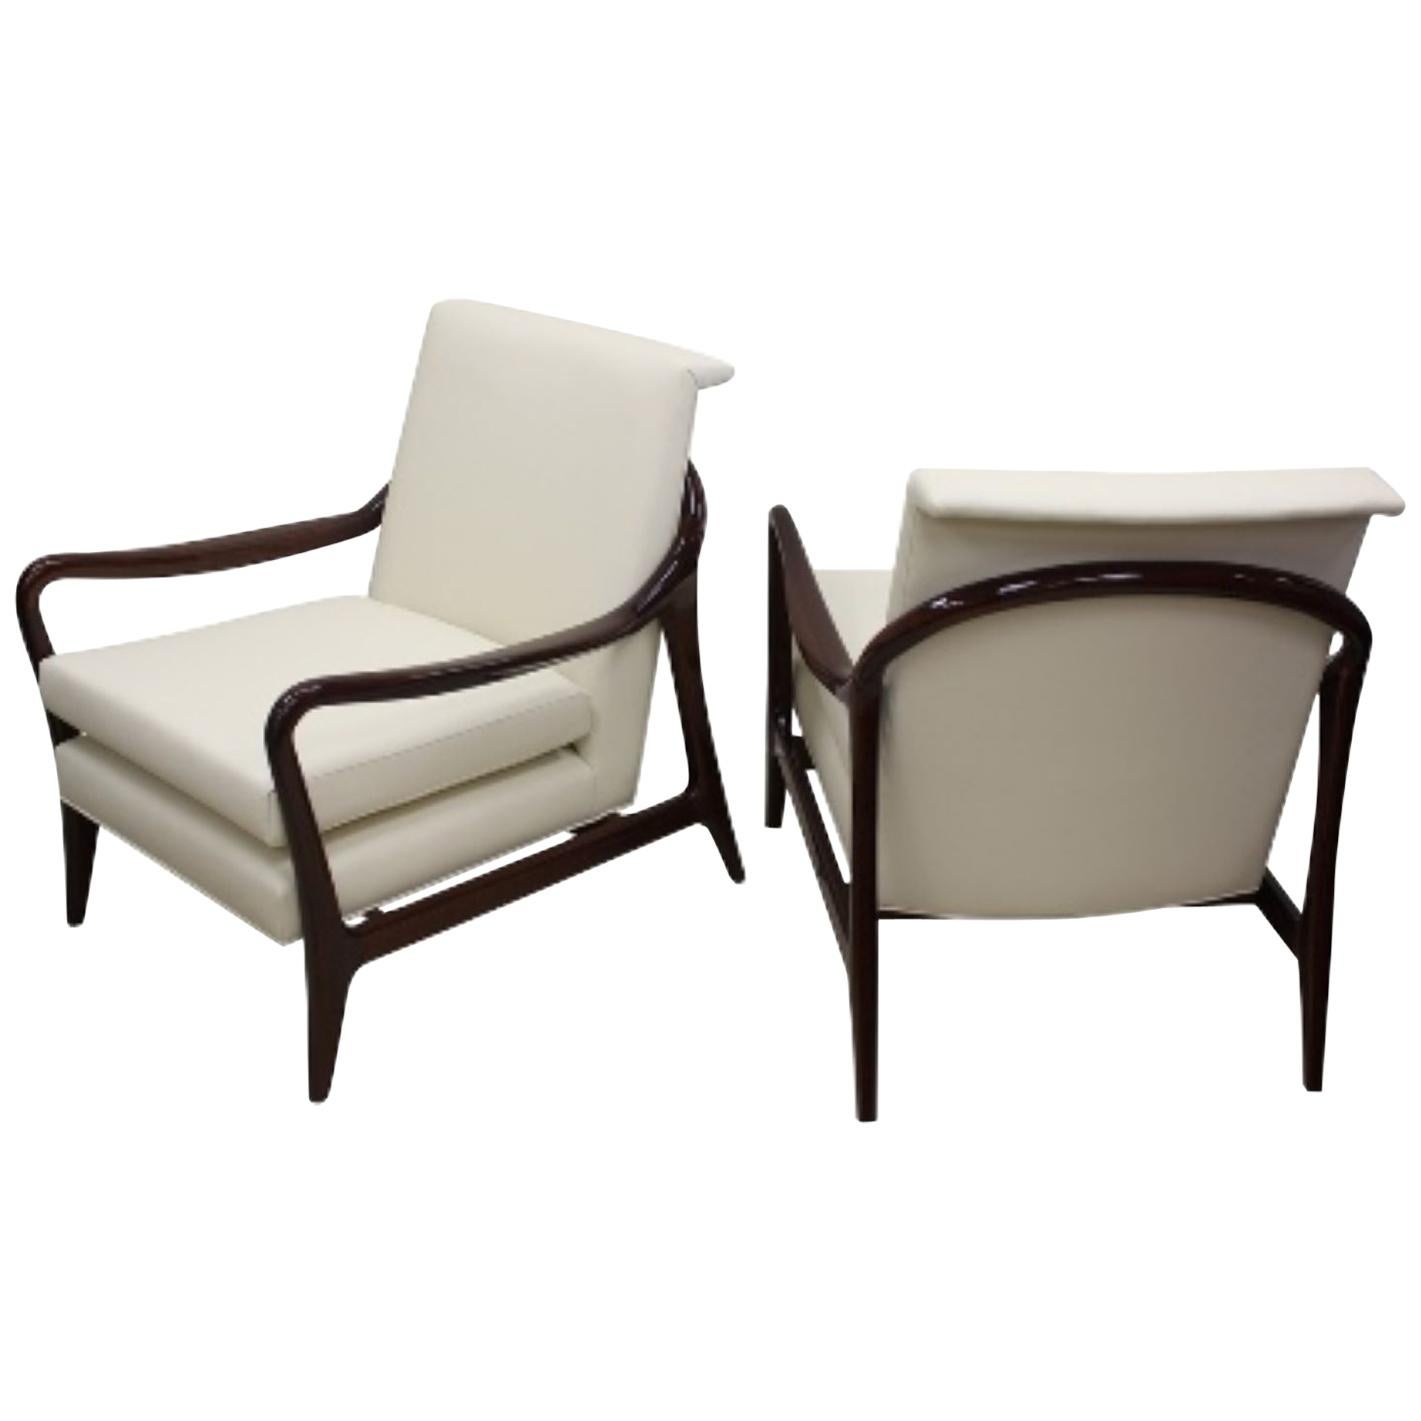 Pair of Sculptural Mid-Century Kagan Style Walnut and Leather Lounge Chairs